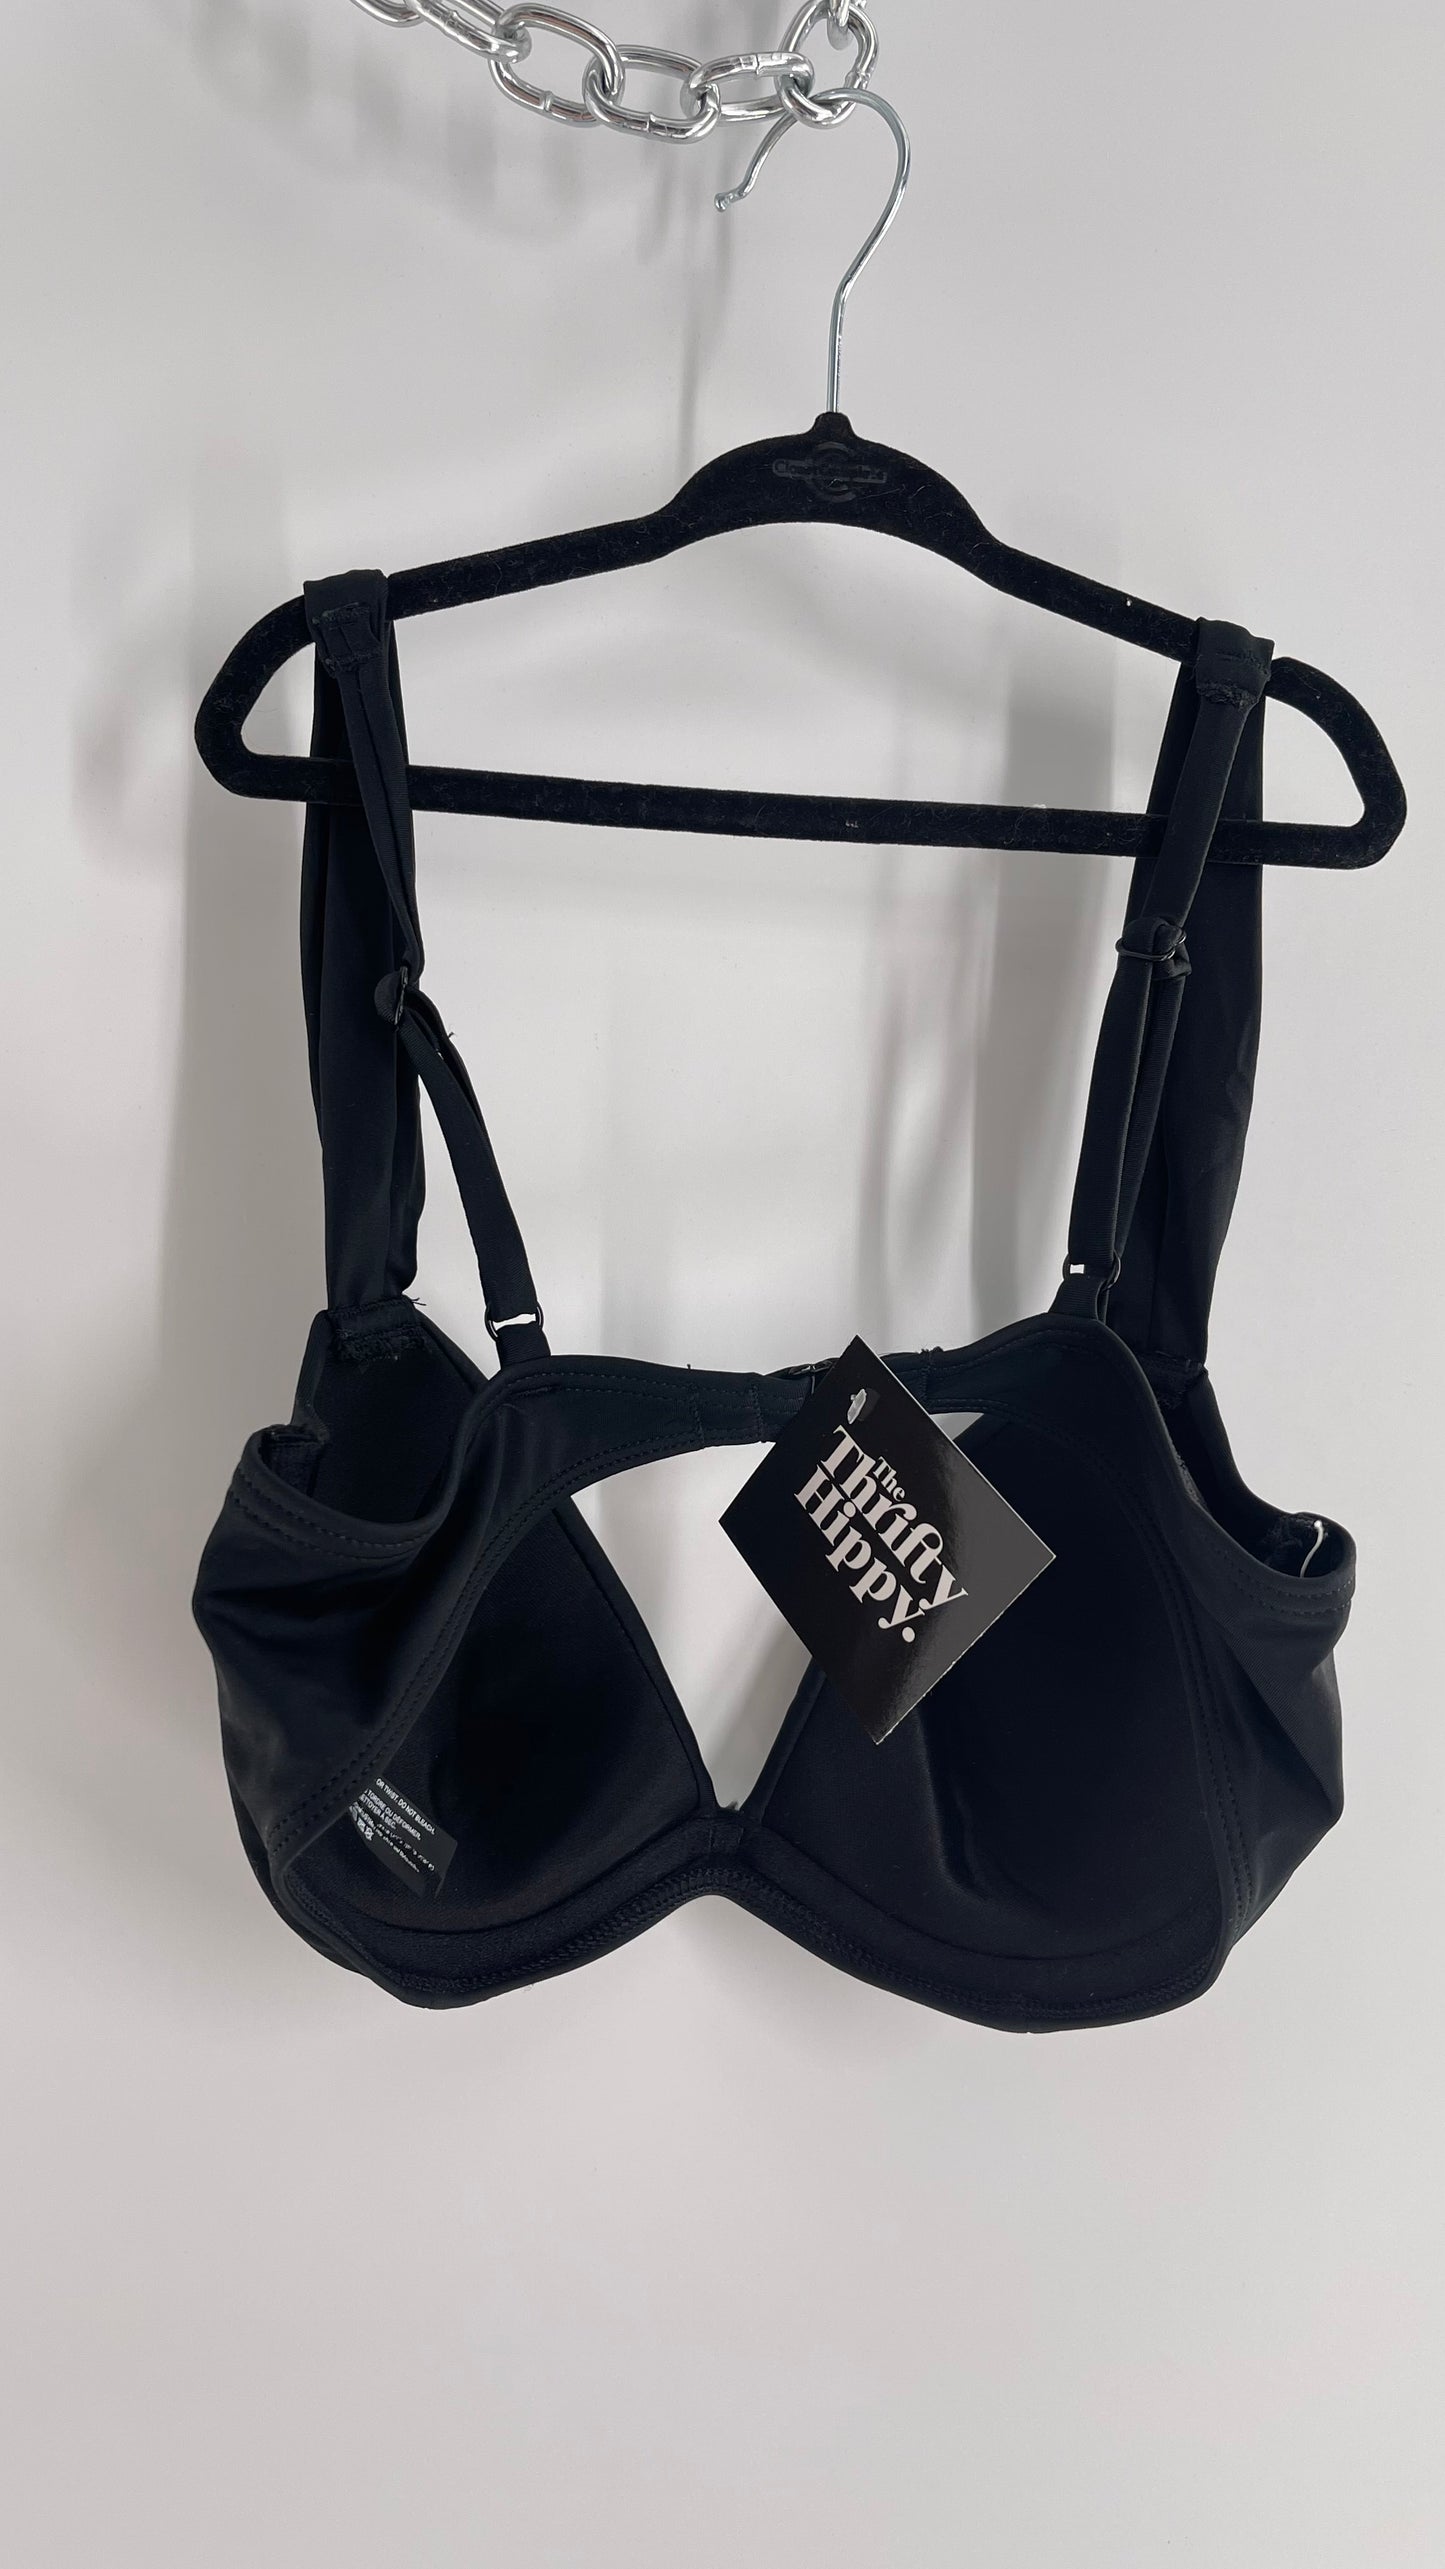 Urban Outfitters Out From Under Black Underwire Swim Top (Medium)